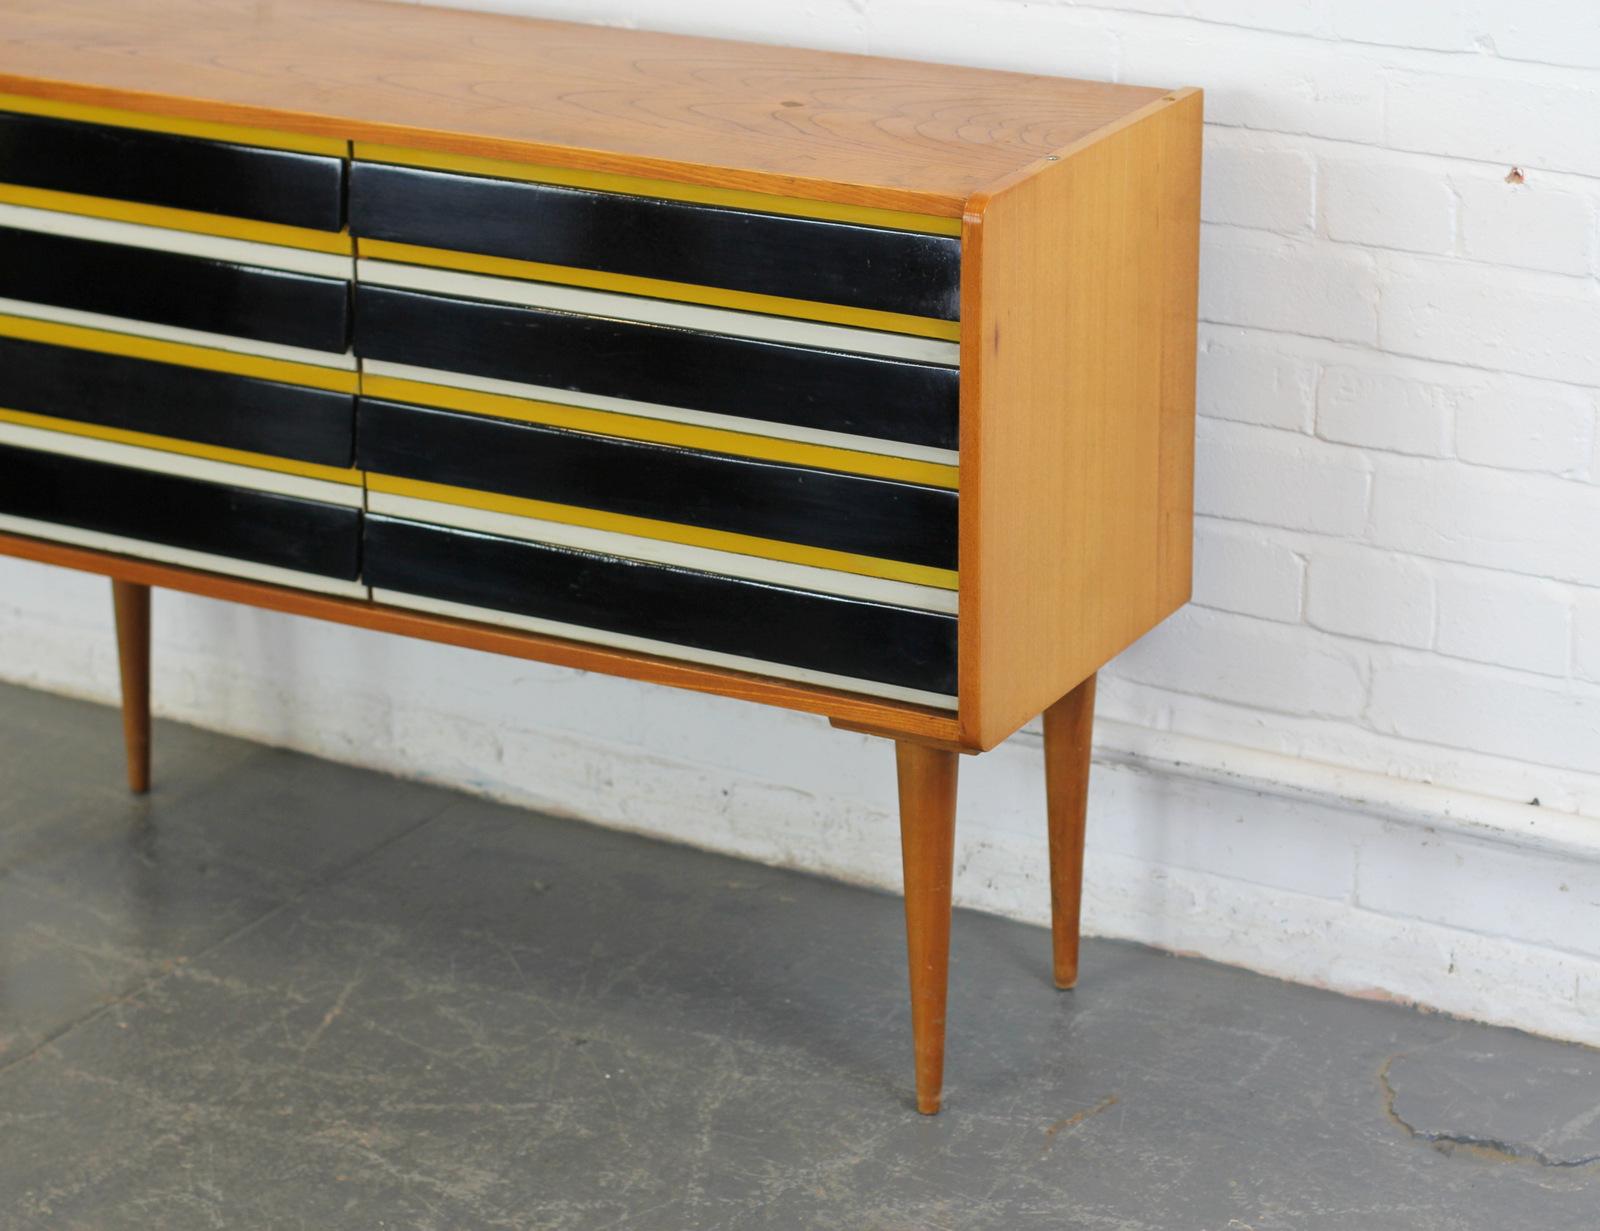 Midcentury sideboard by Jiri Jiroutek, circa 1960s

- Atomic legs
- 8 drawers
- Designed by Jiri Jiroutek
- Czech, Dated 1961
- 110cm long x 38cm deep x 76cm tall

Condition Report

Only some minor cosmetic wear.